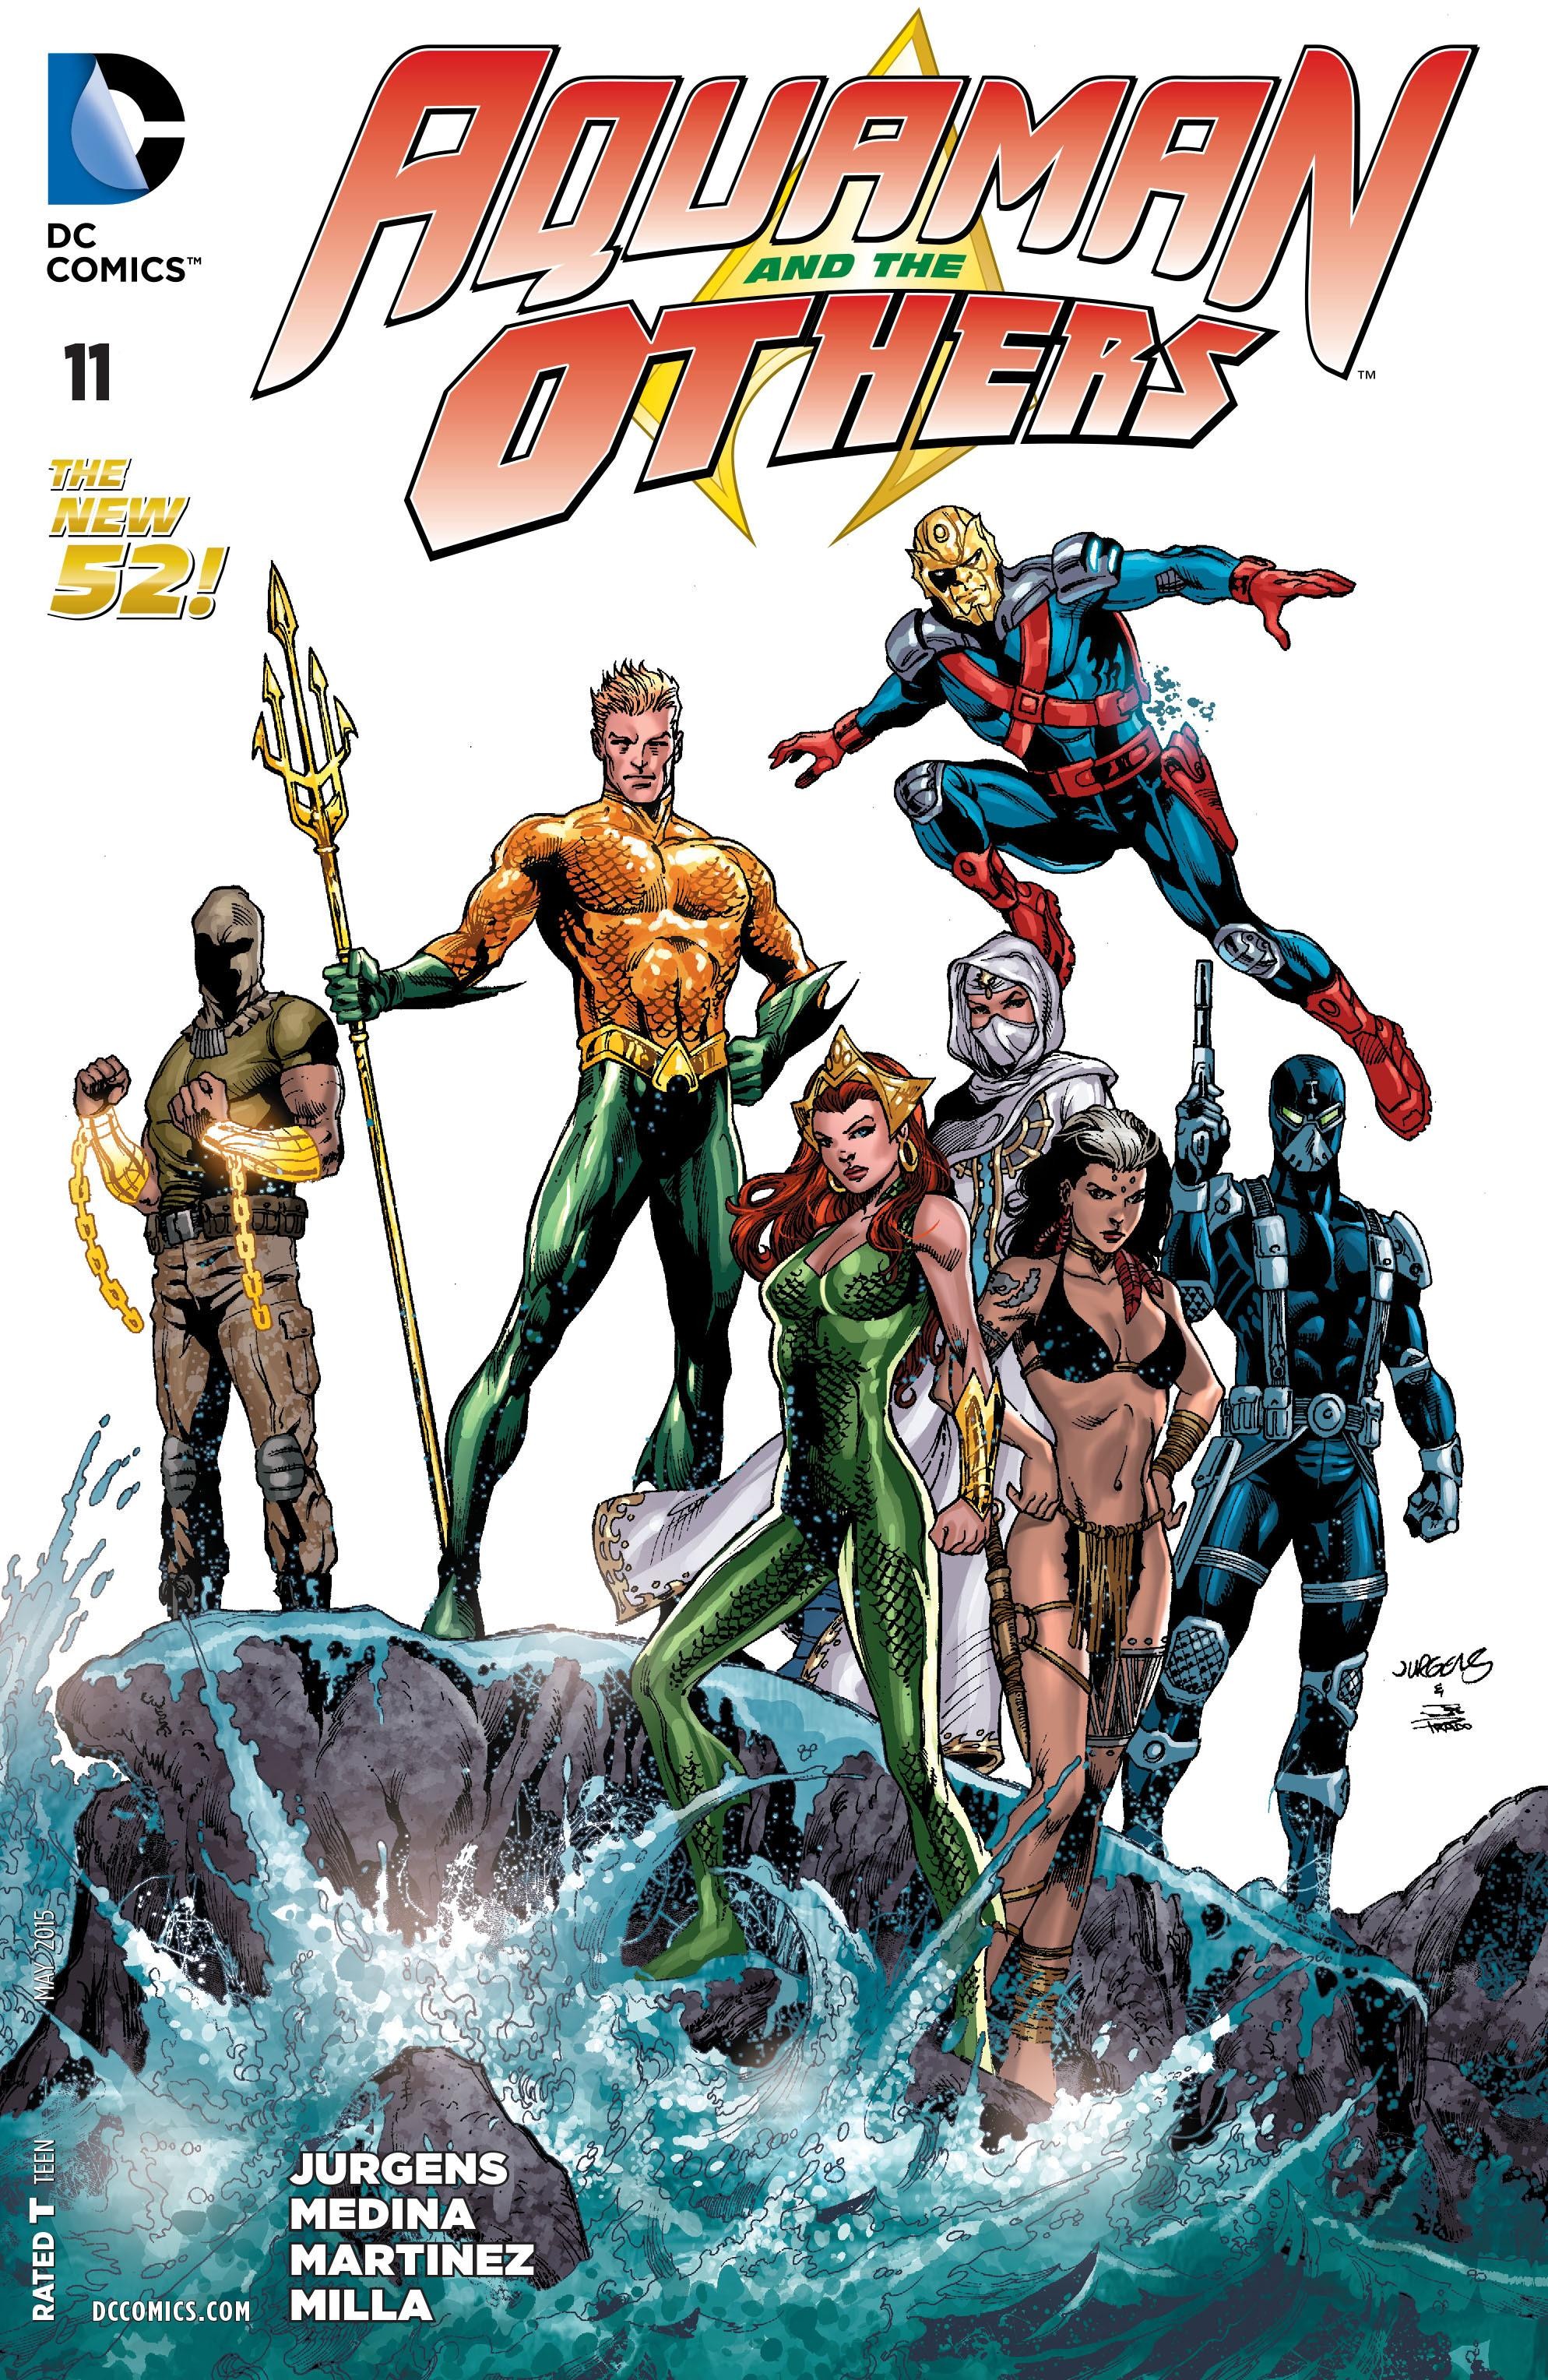 Aquaman and the Others Vol. 1 #11